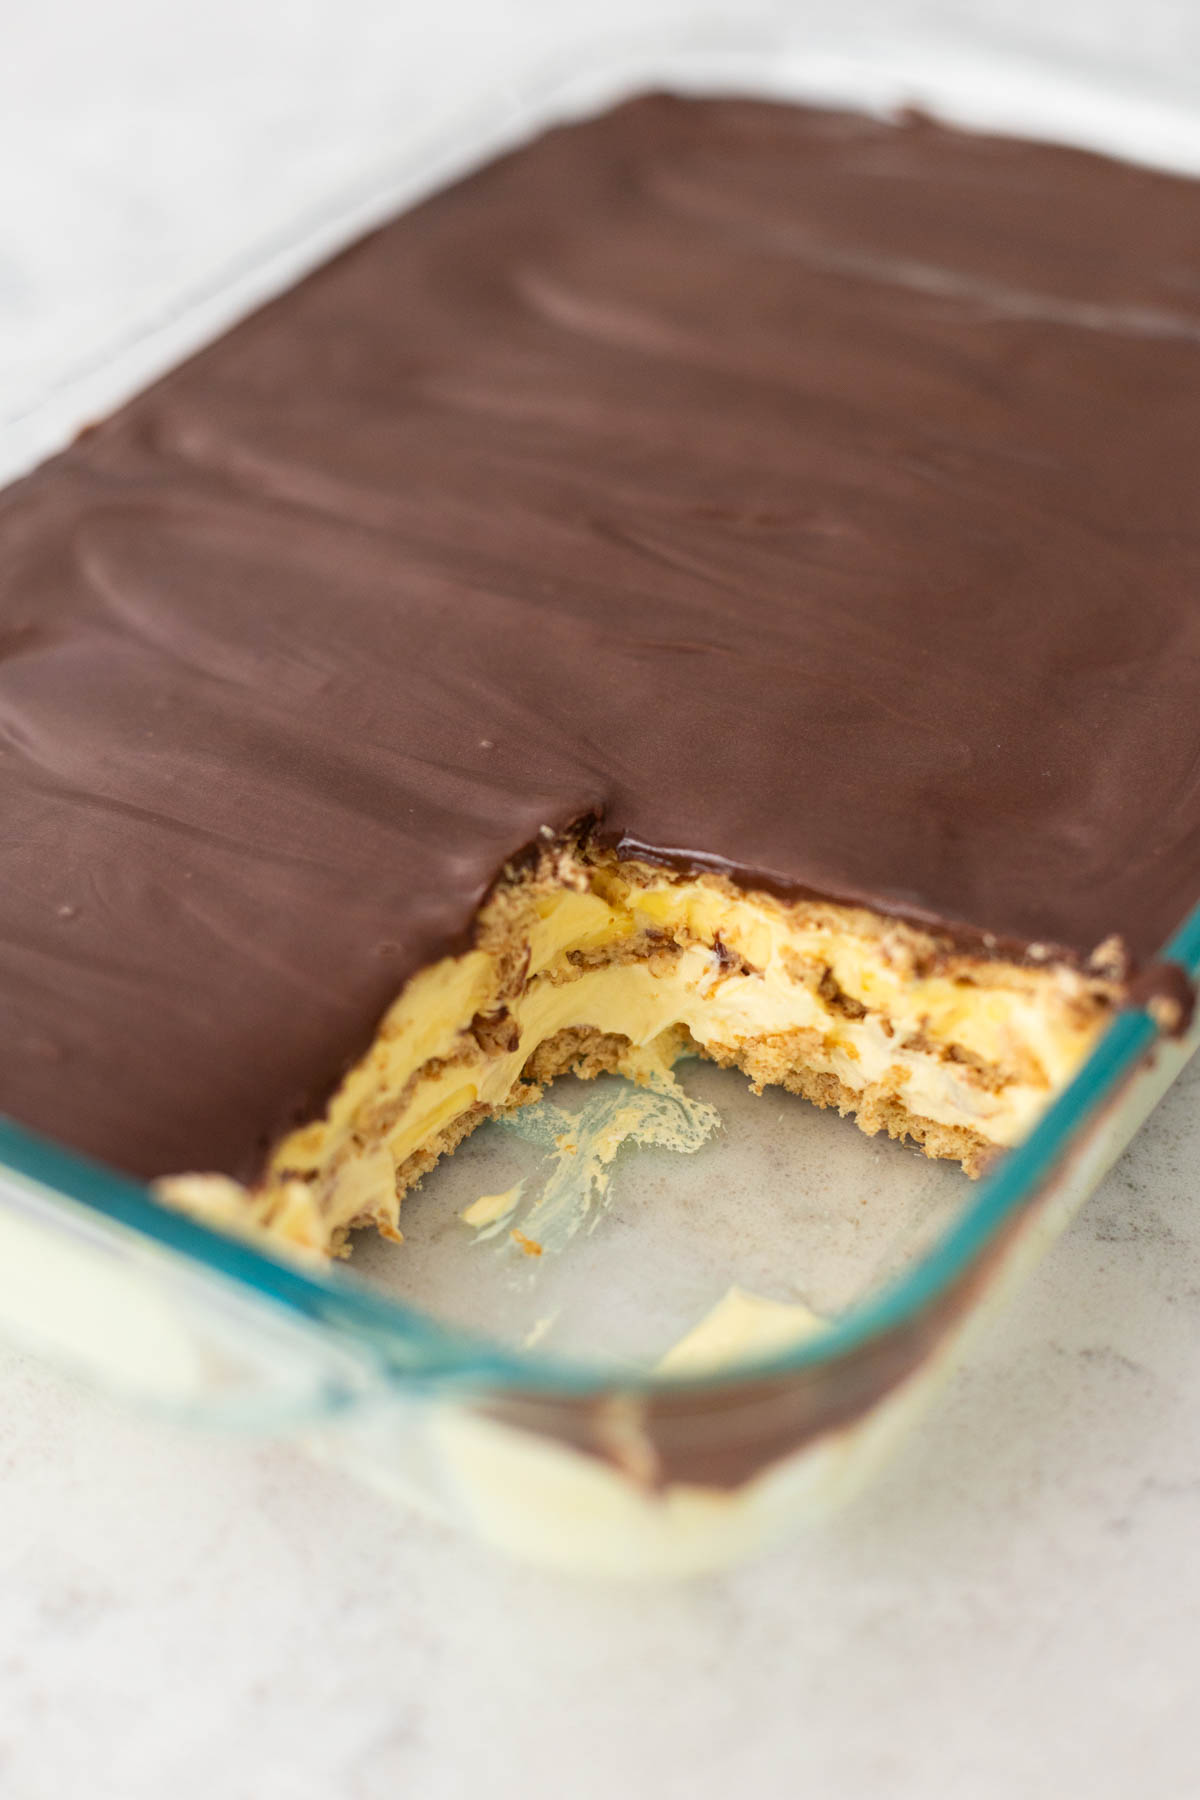 The 9x13-inch baking dish filled with chocolate eclair cake.